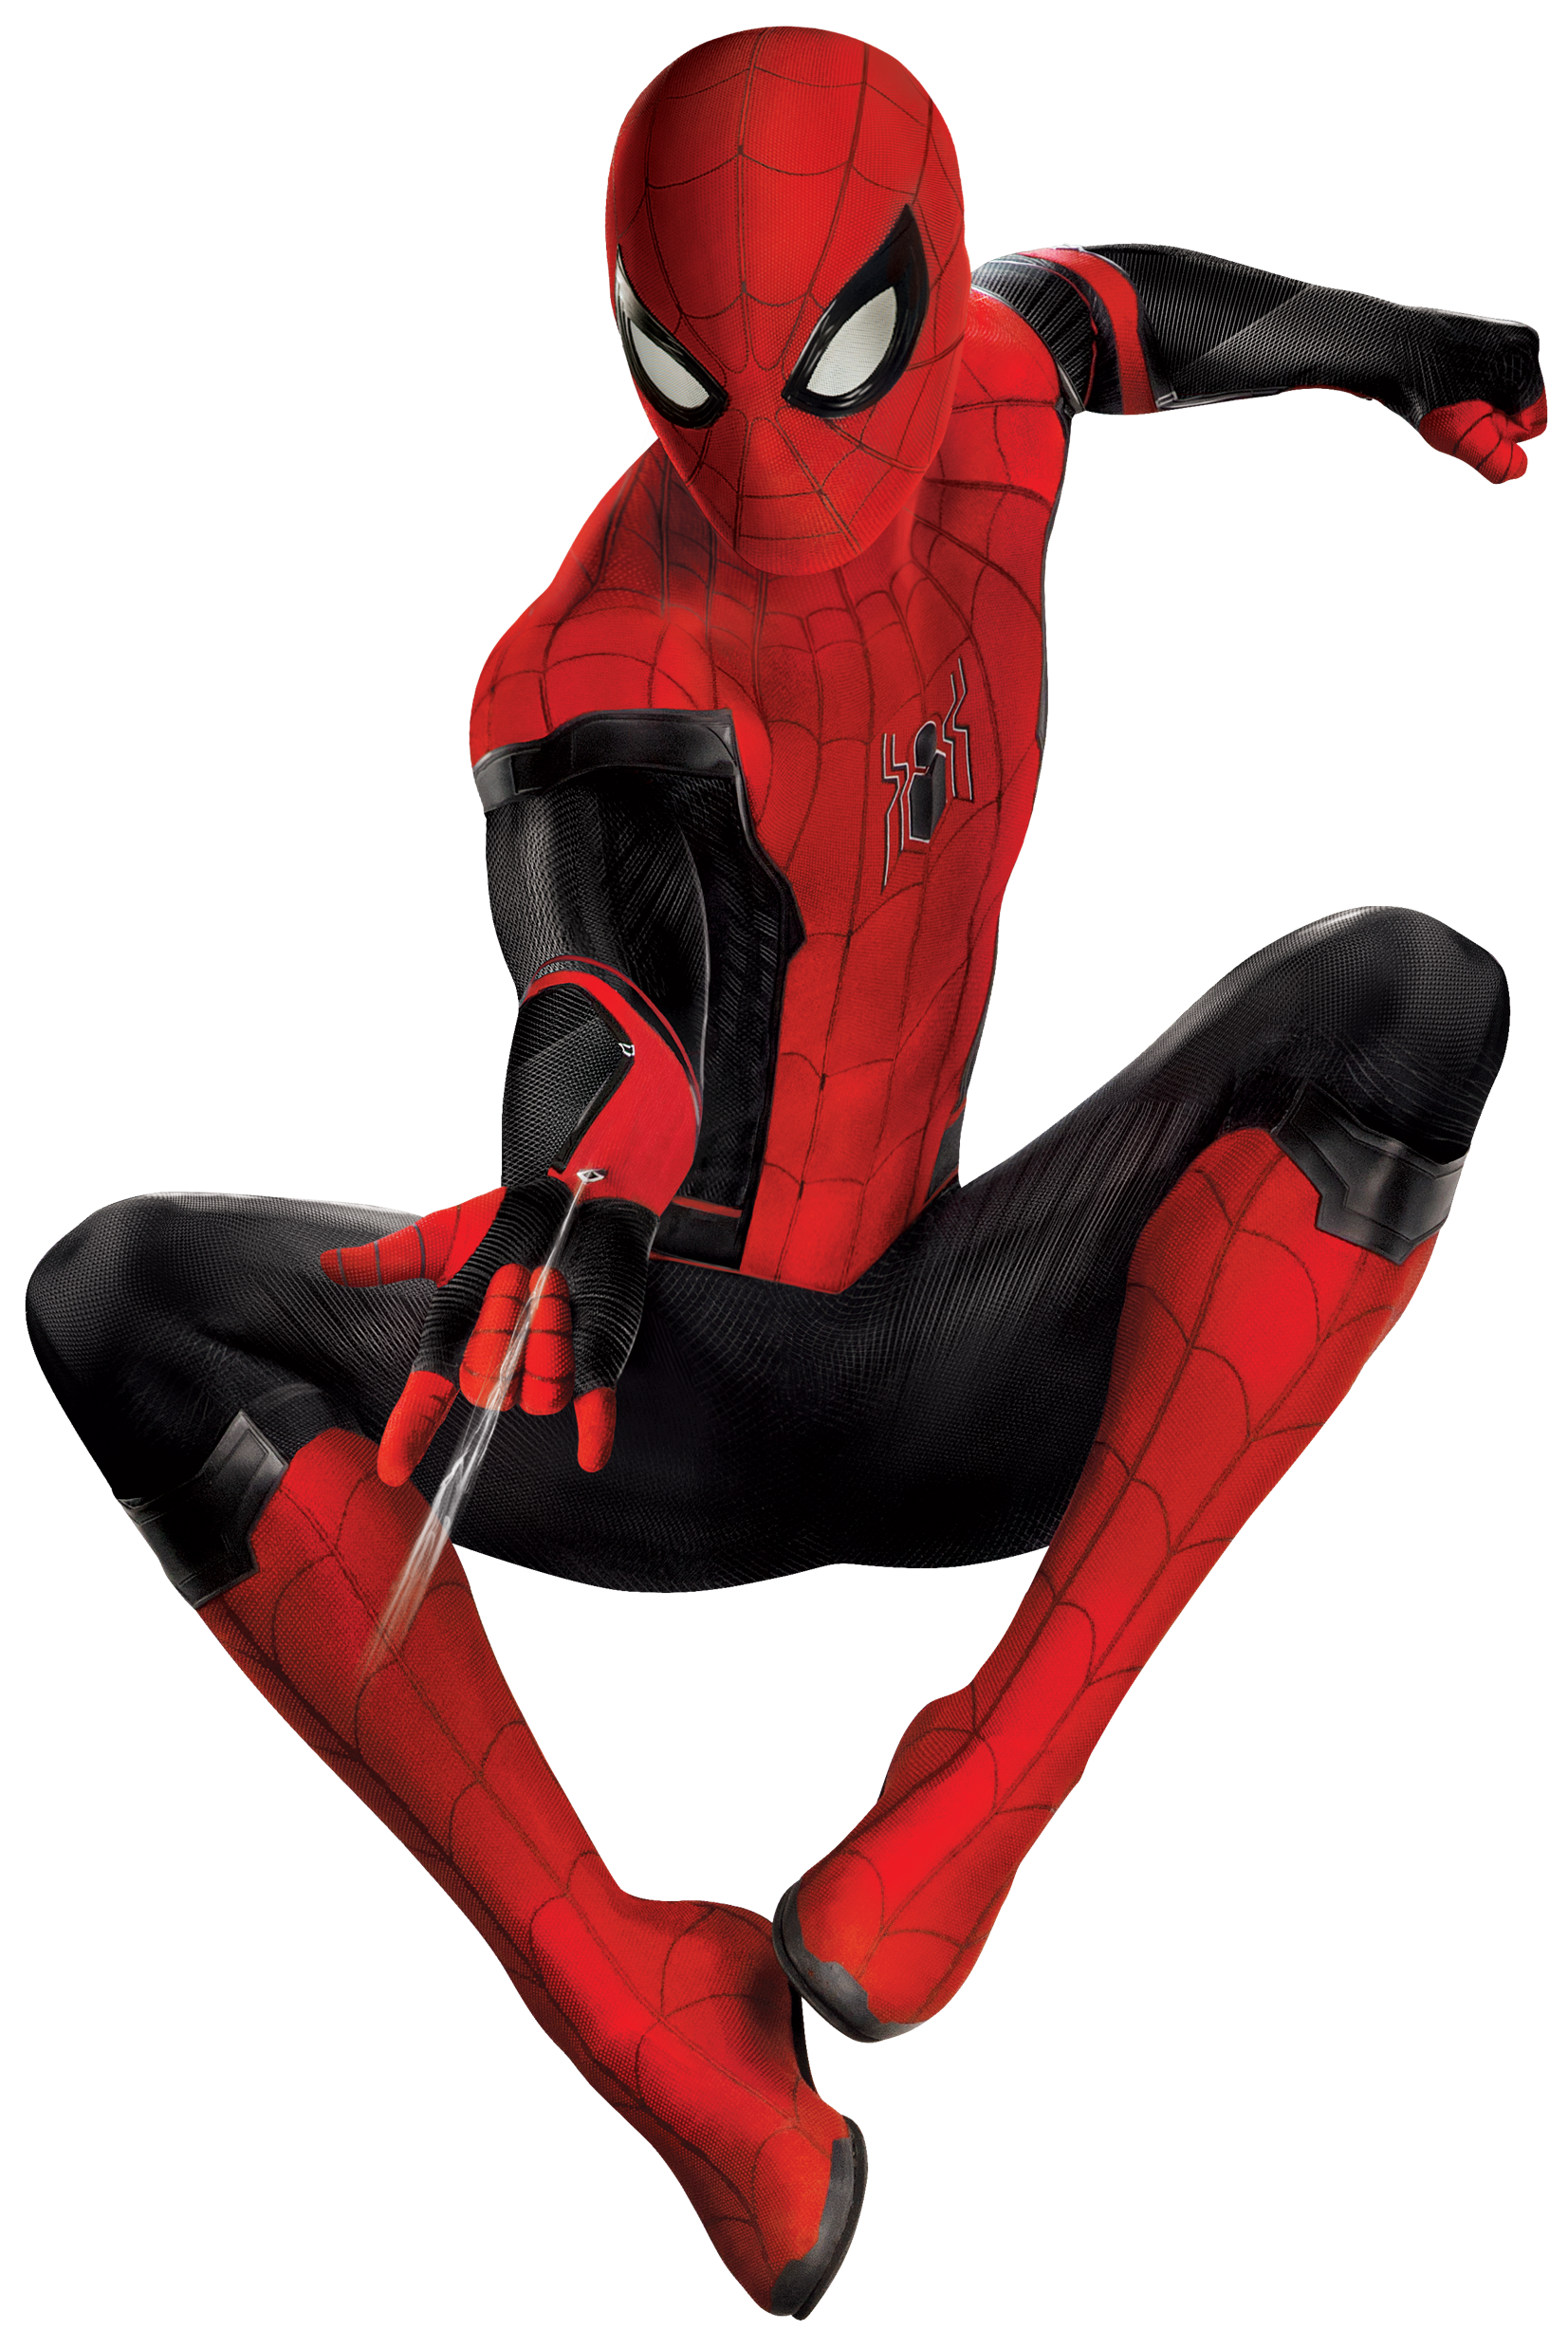 spider man far from home suit